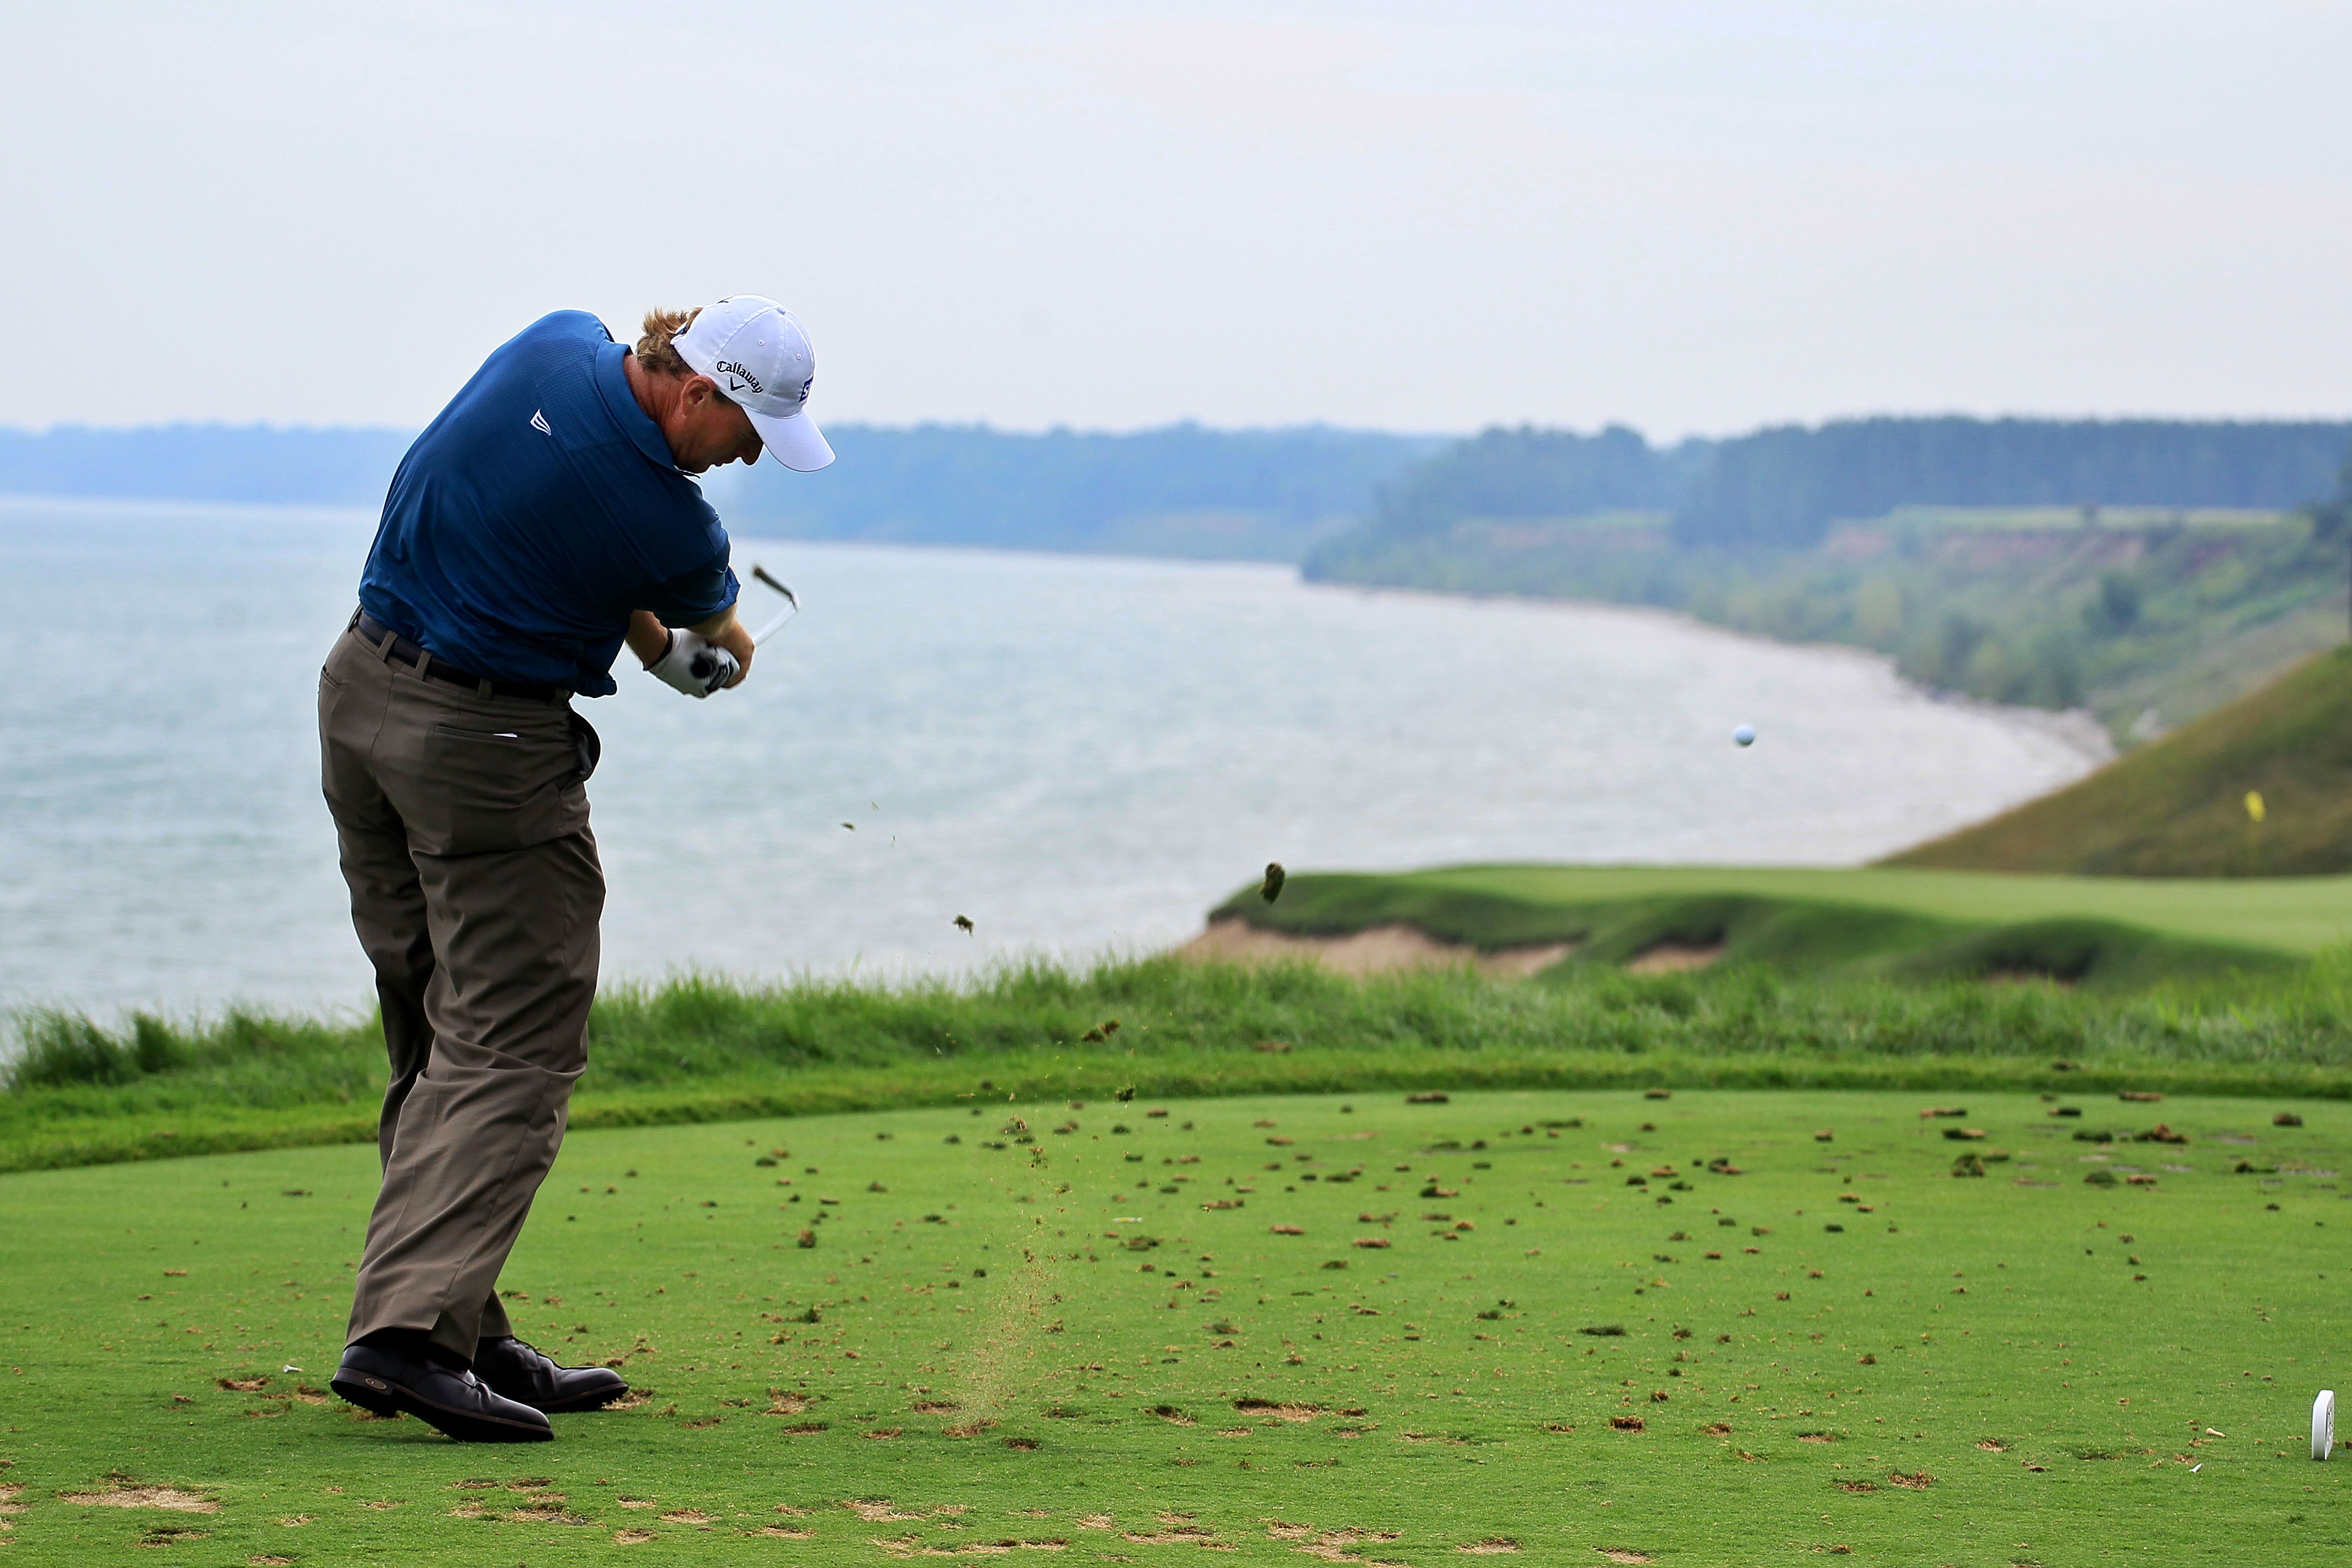 KOHLER, WI - AUGUST 13:  Ernie Els of South Africa hits a tee shot on the third hole during the second round of the 92nd PGA Championship on the Straits Course at Whistling Straits on August 13, 2010 in Kohler, Wisconsin.  (Photo by Andy Lyons/Getty Image